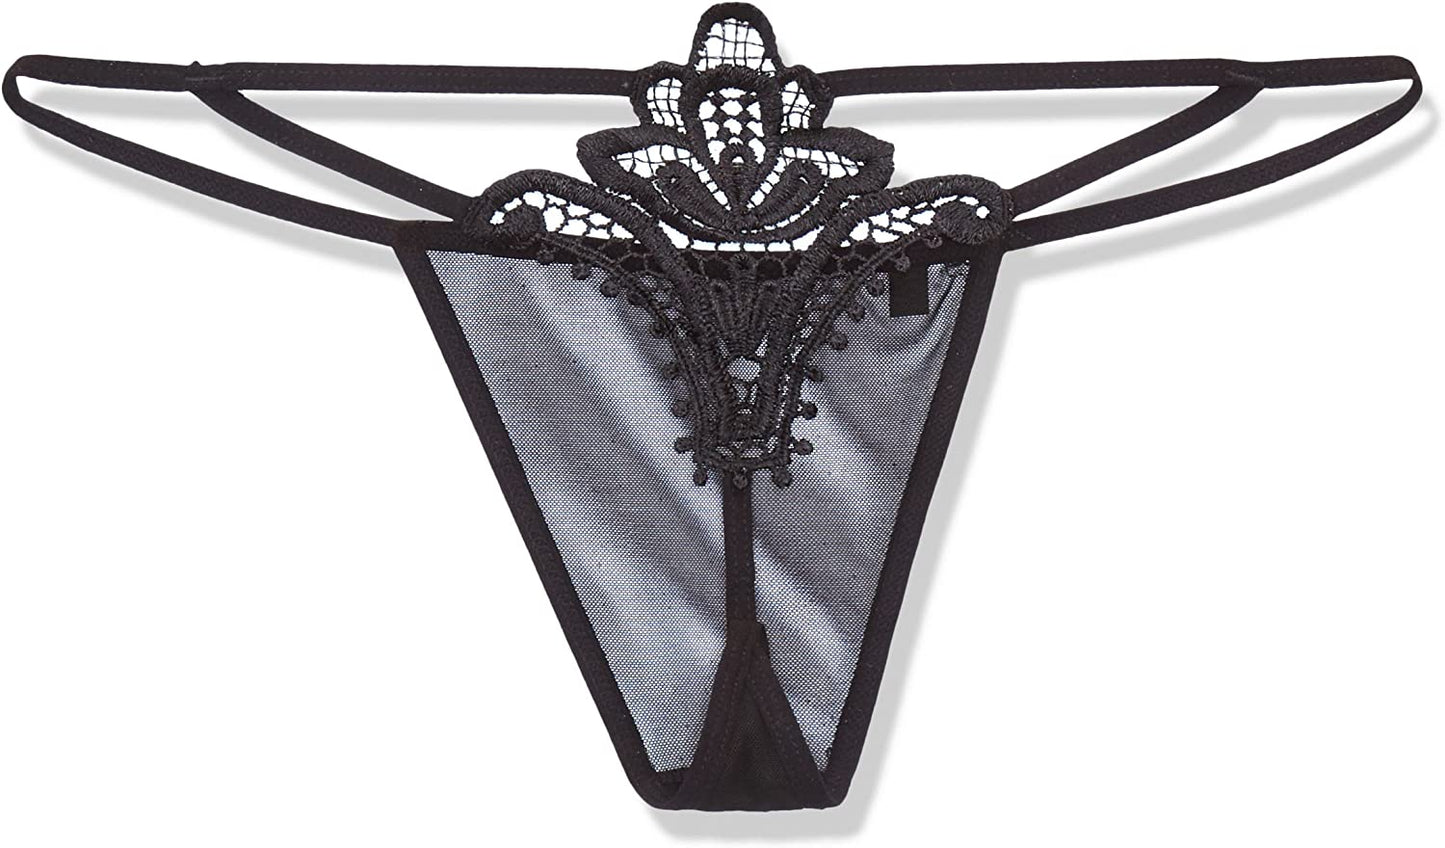 Obsessive | Luiza Lovely G-String - Classic Black Elegant Elastic G-String with a Gorgeously detailed design above the Derriere. Plain front made out of translucent mesh Eye-catching adornment in the shape of tulip on the back Nice in touch and stretchable fabric (94% polyamide, 6% elastane). SKU 5187-BLK-L/XL Size L/XL Colour Black UPC 5900308555187 Case Count 1